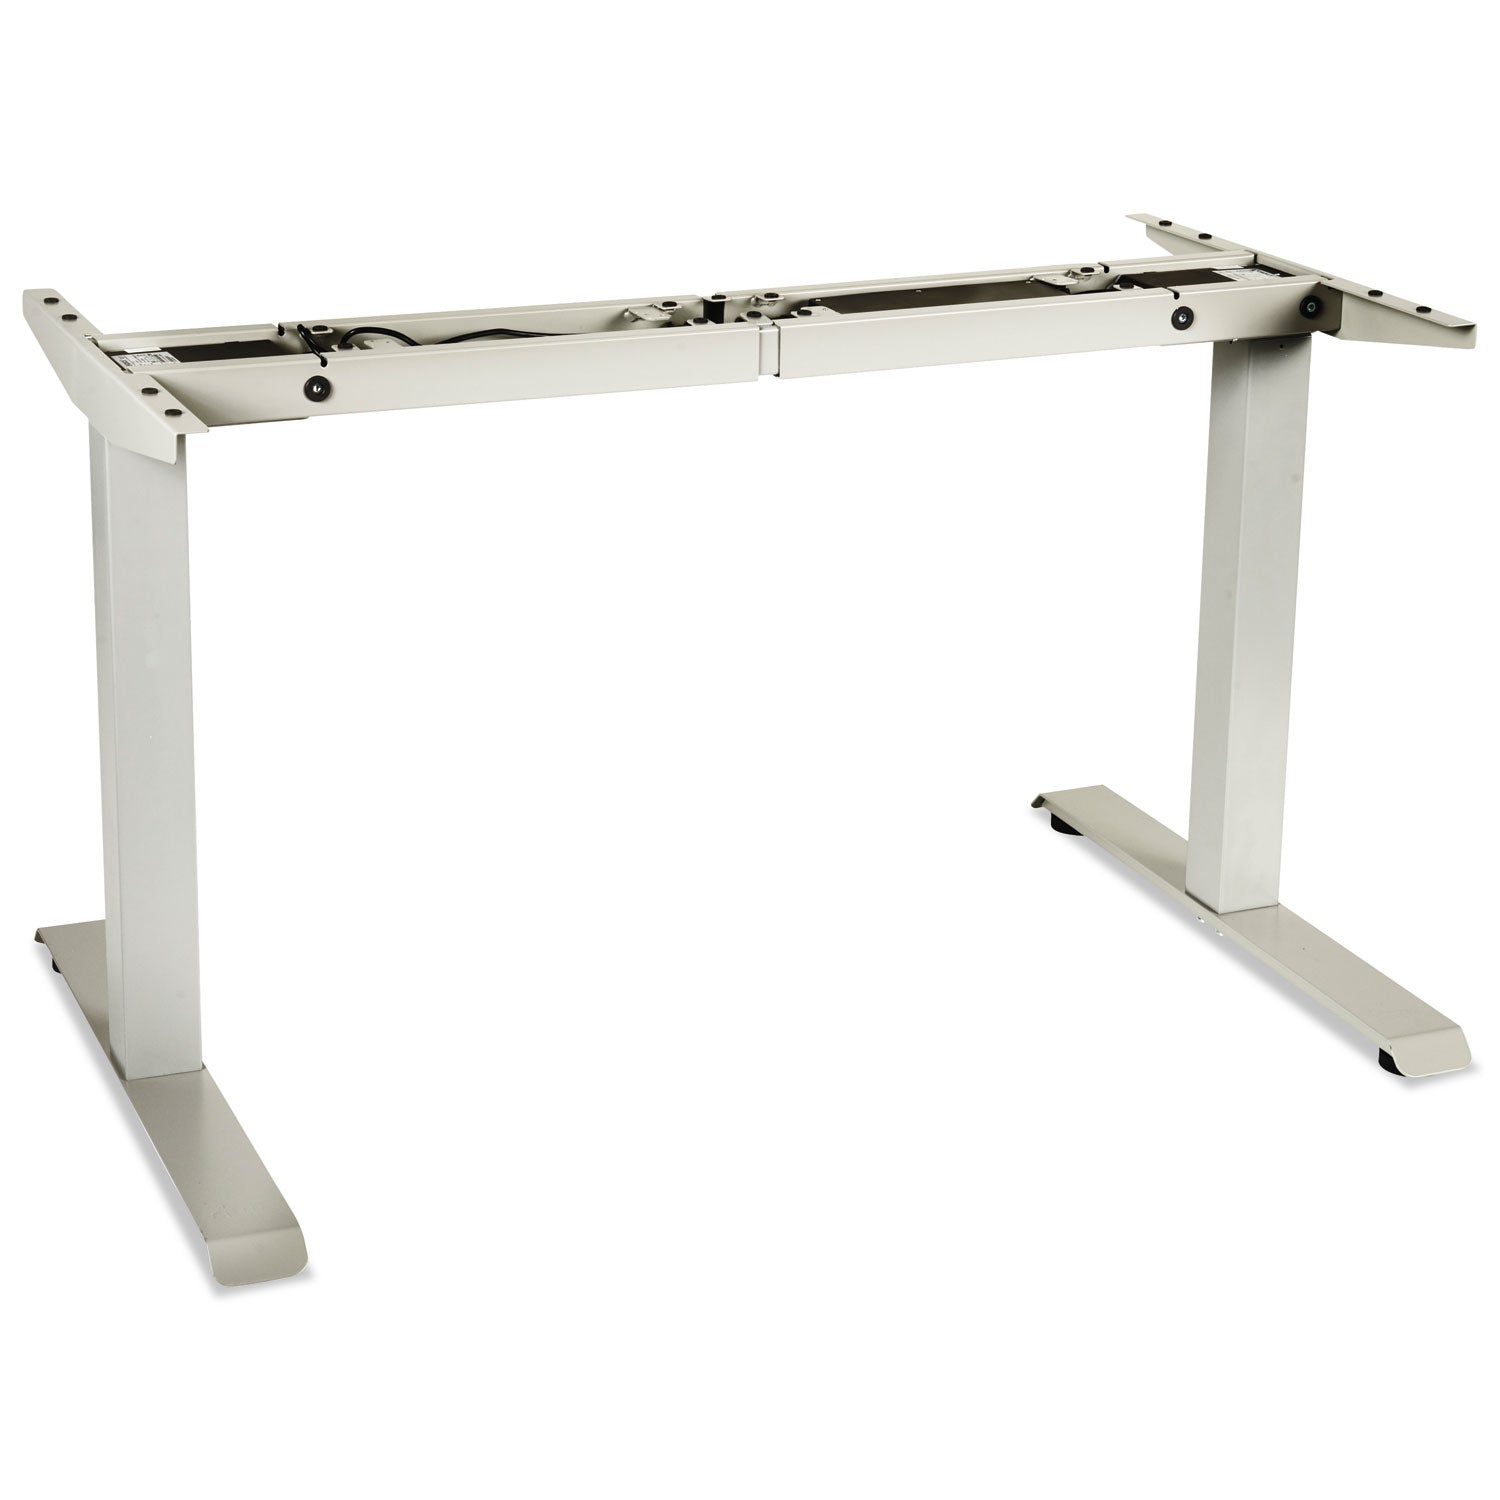 adaptivergo-sit-stand-two-stage-electric-height-adjustable-table-base-4806-x-2435-x-275-to-472-gray_aleht2ssg - 2